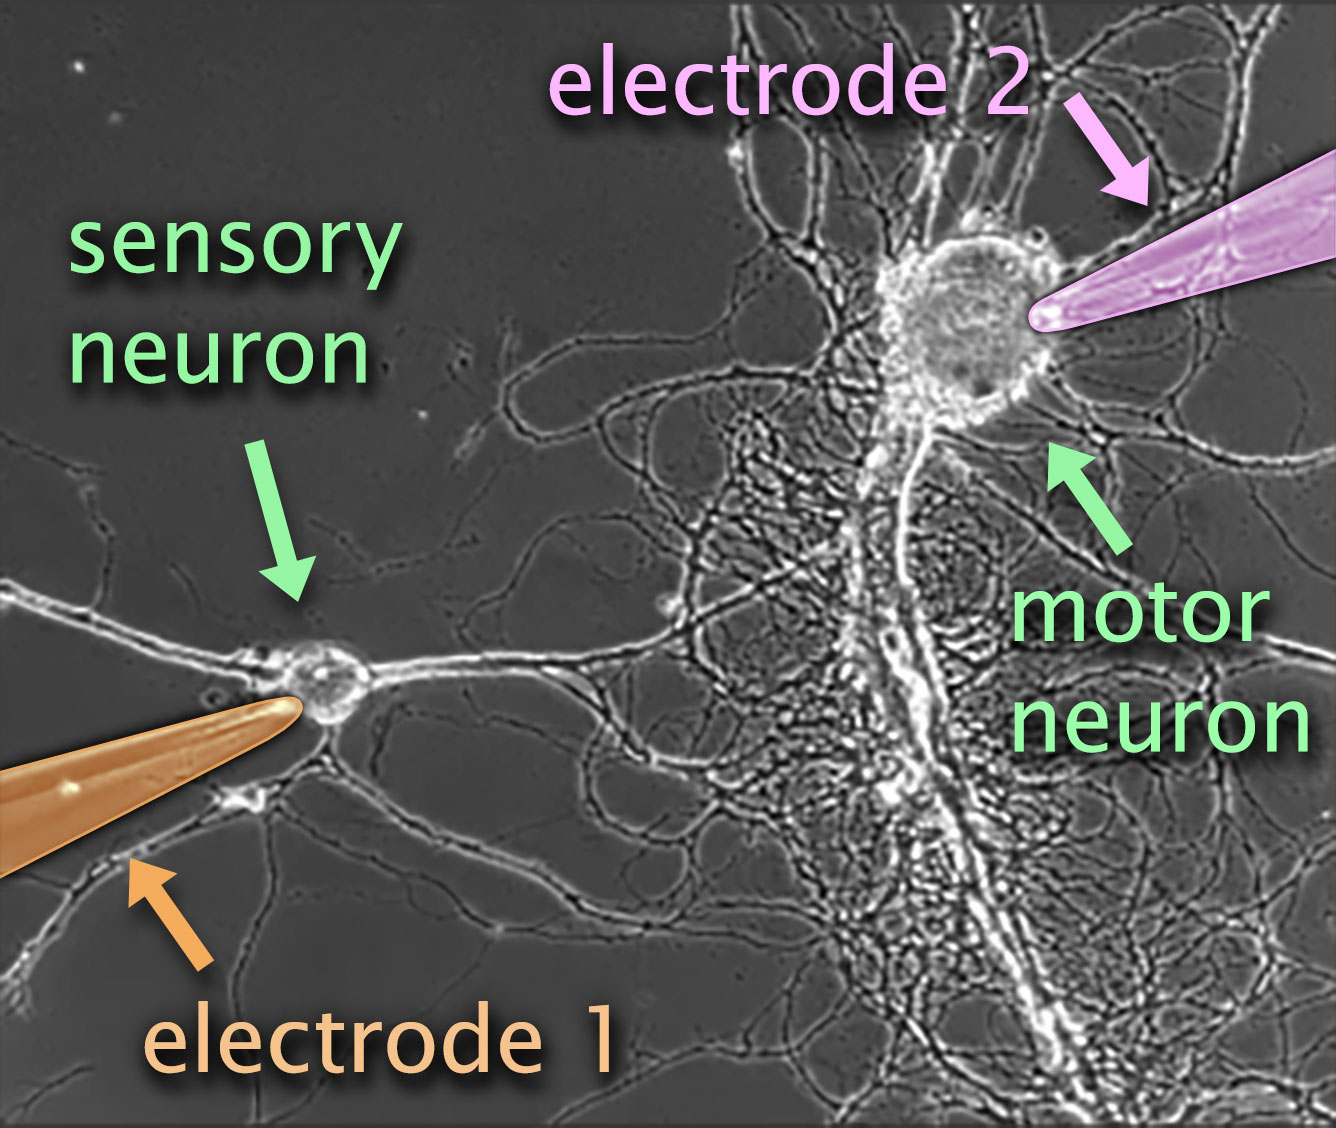 Aplysia neurons with electrode 1 placed in a sensory neuron connected by a synapse to a motor neuron with electrode 2 placed in it.